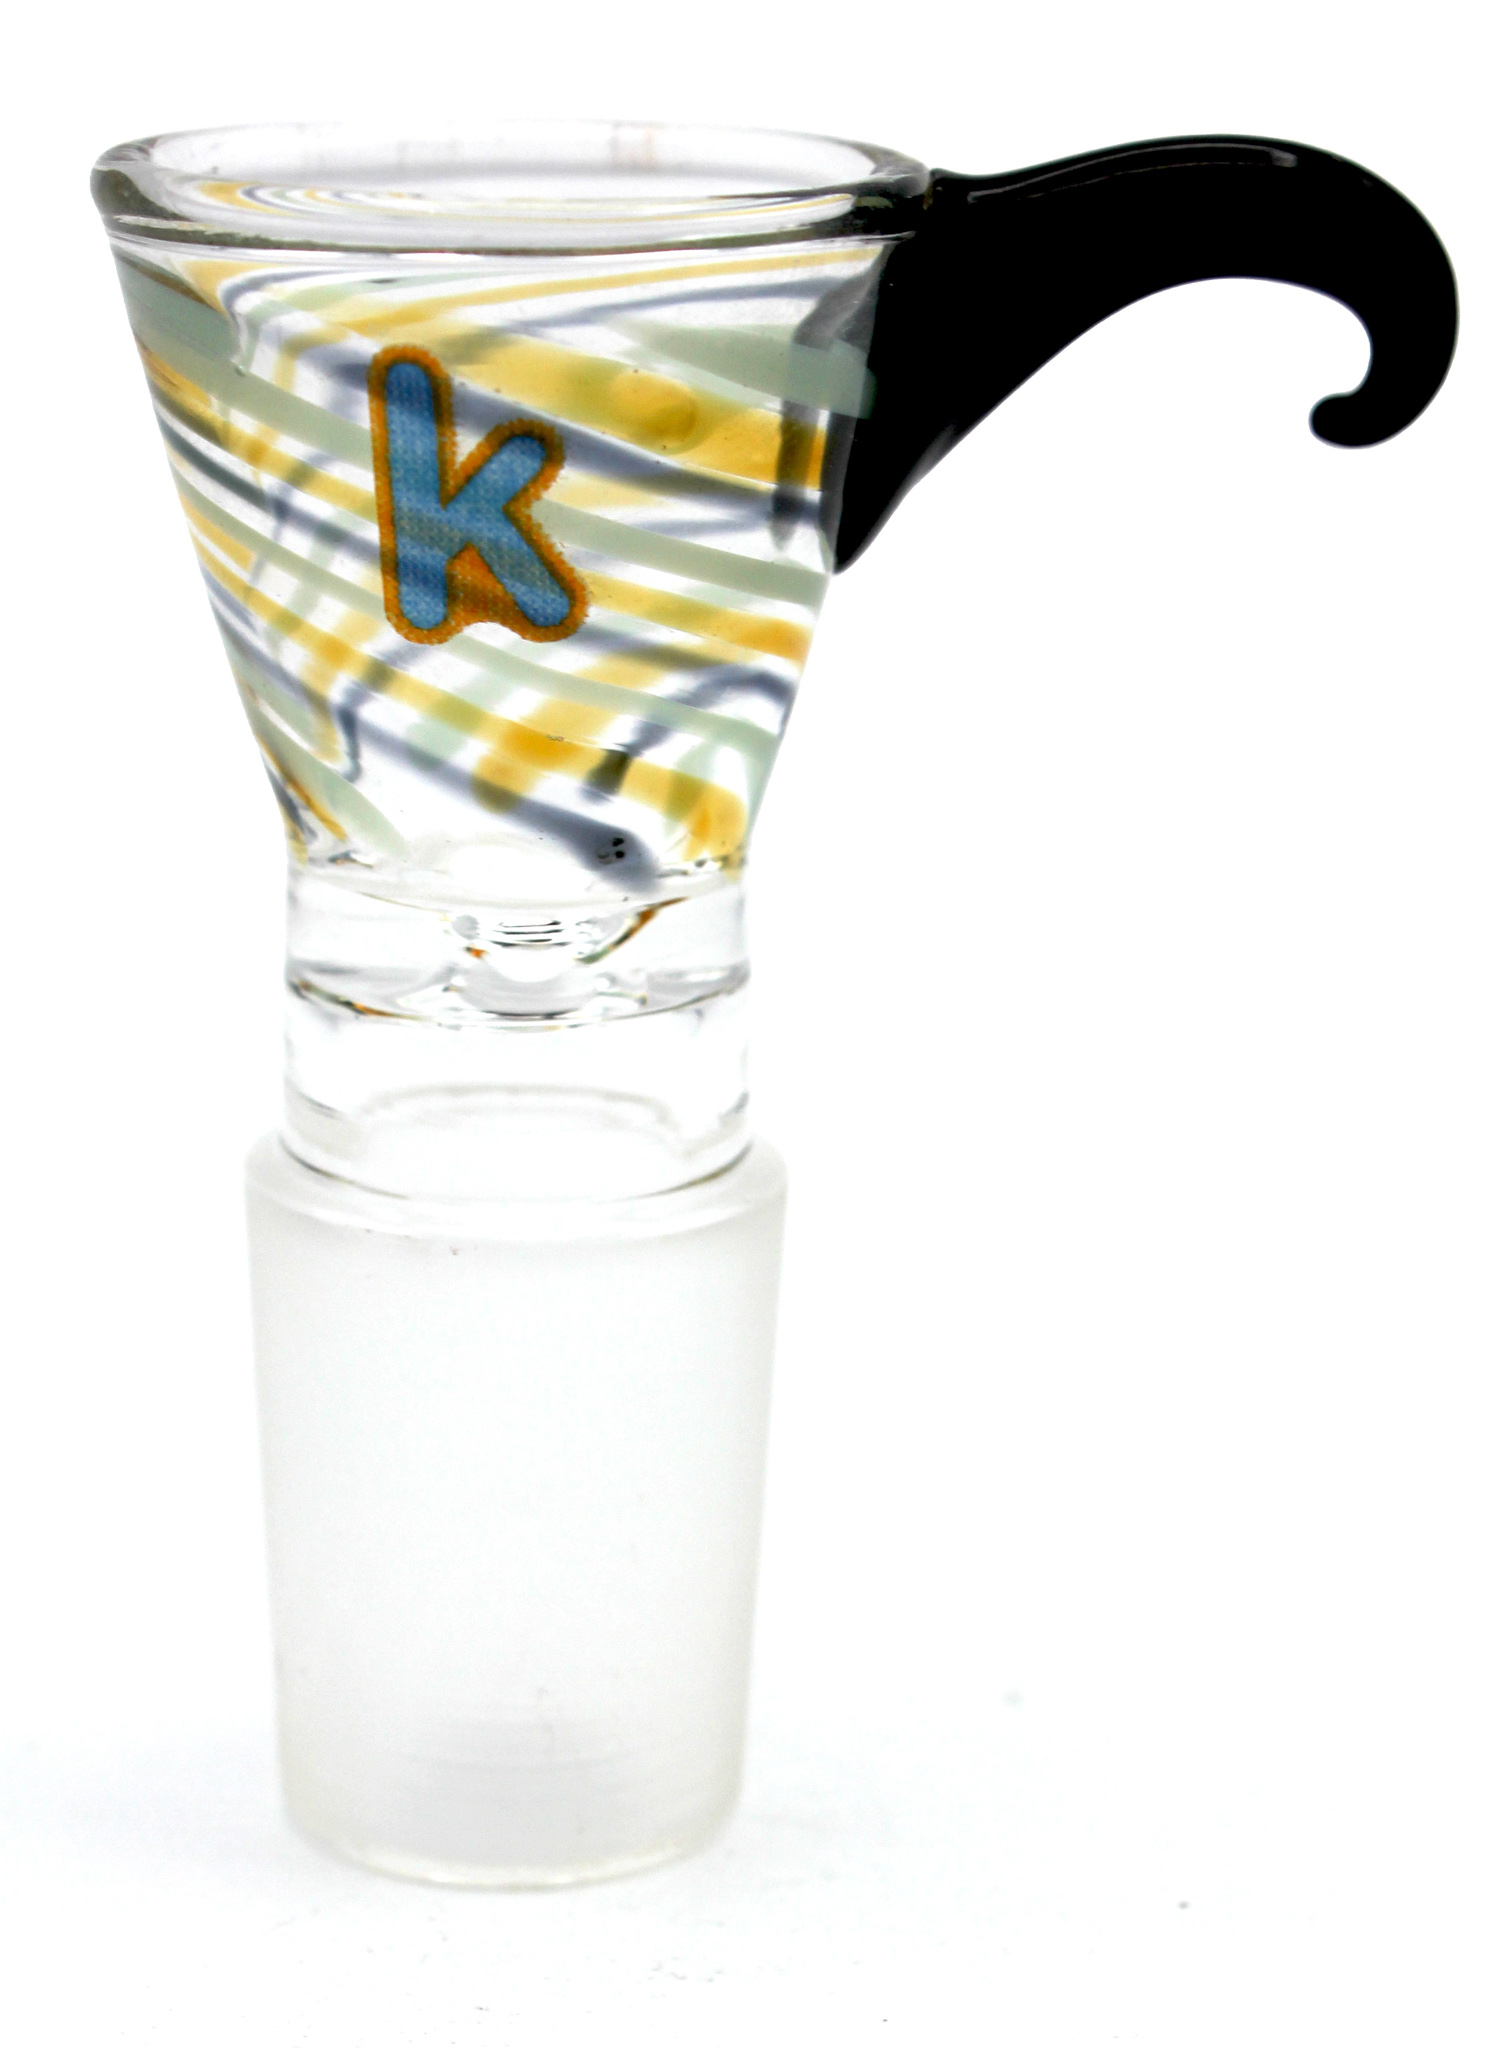 Kandy Bowl 19mm Male Funnel Bowl W/Fumed Lines Going Around & Curved Horn